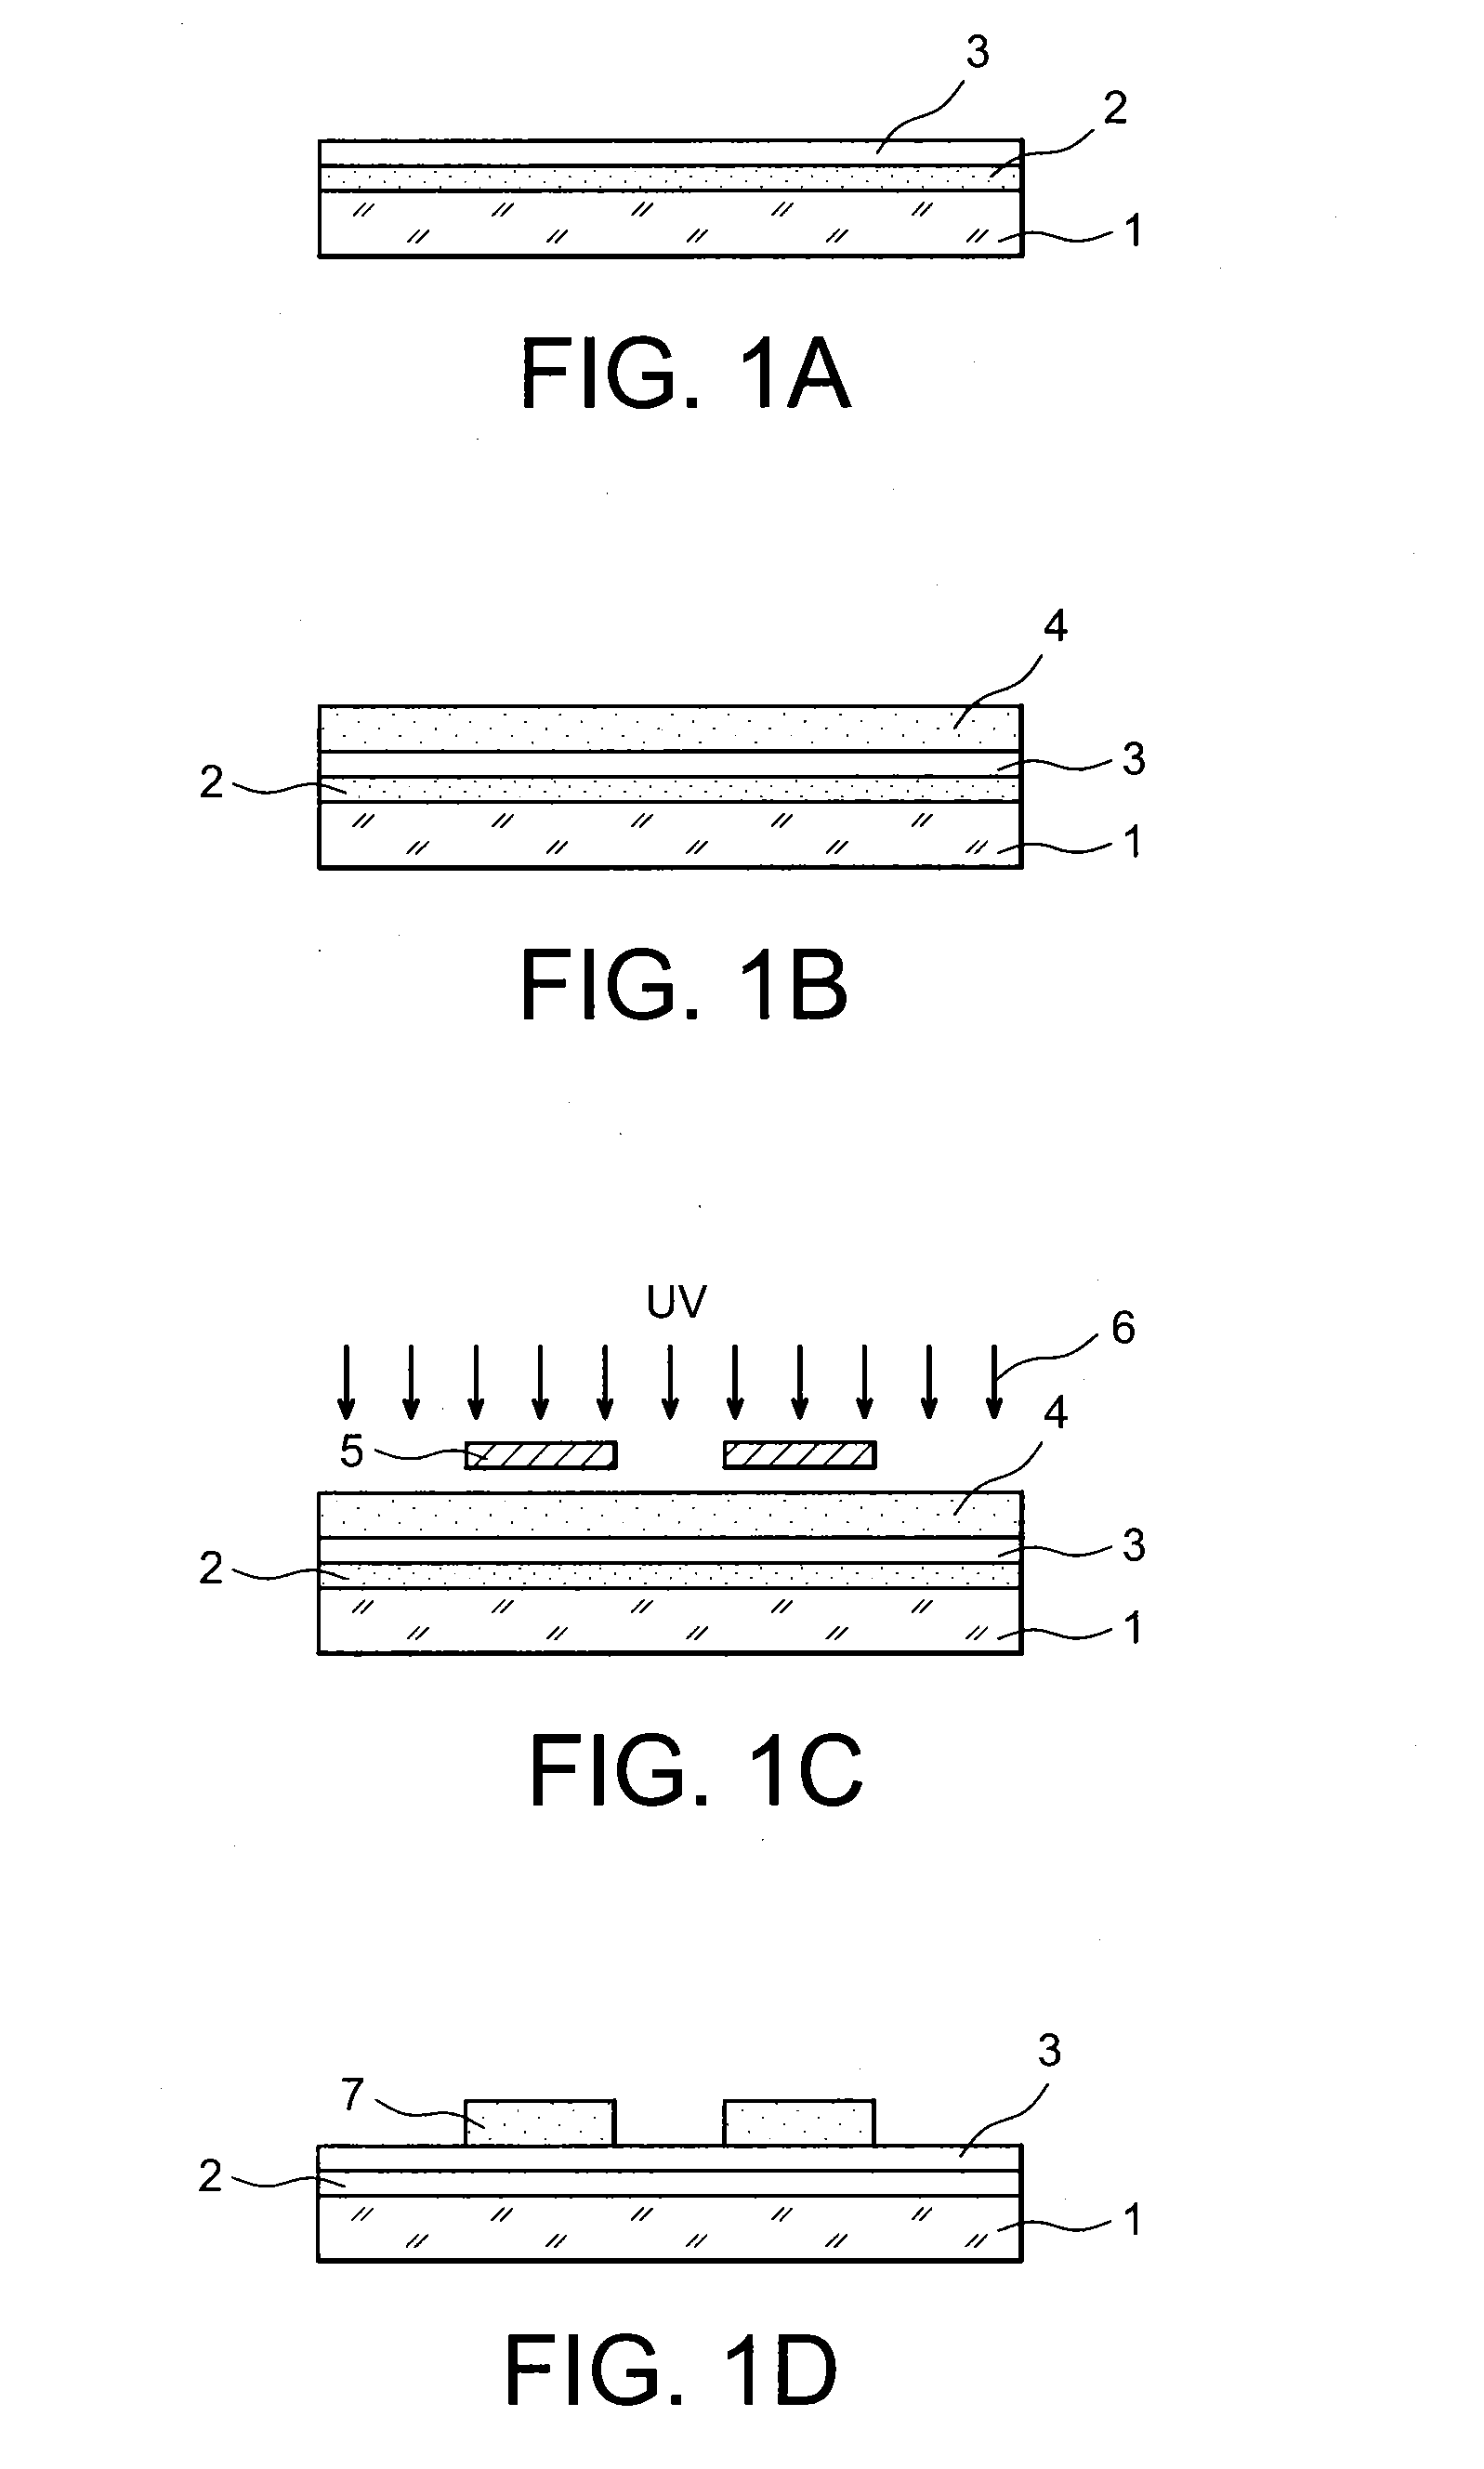 Method for manufacturing a flexible intraocular retinal implant having doped diamond electrodes